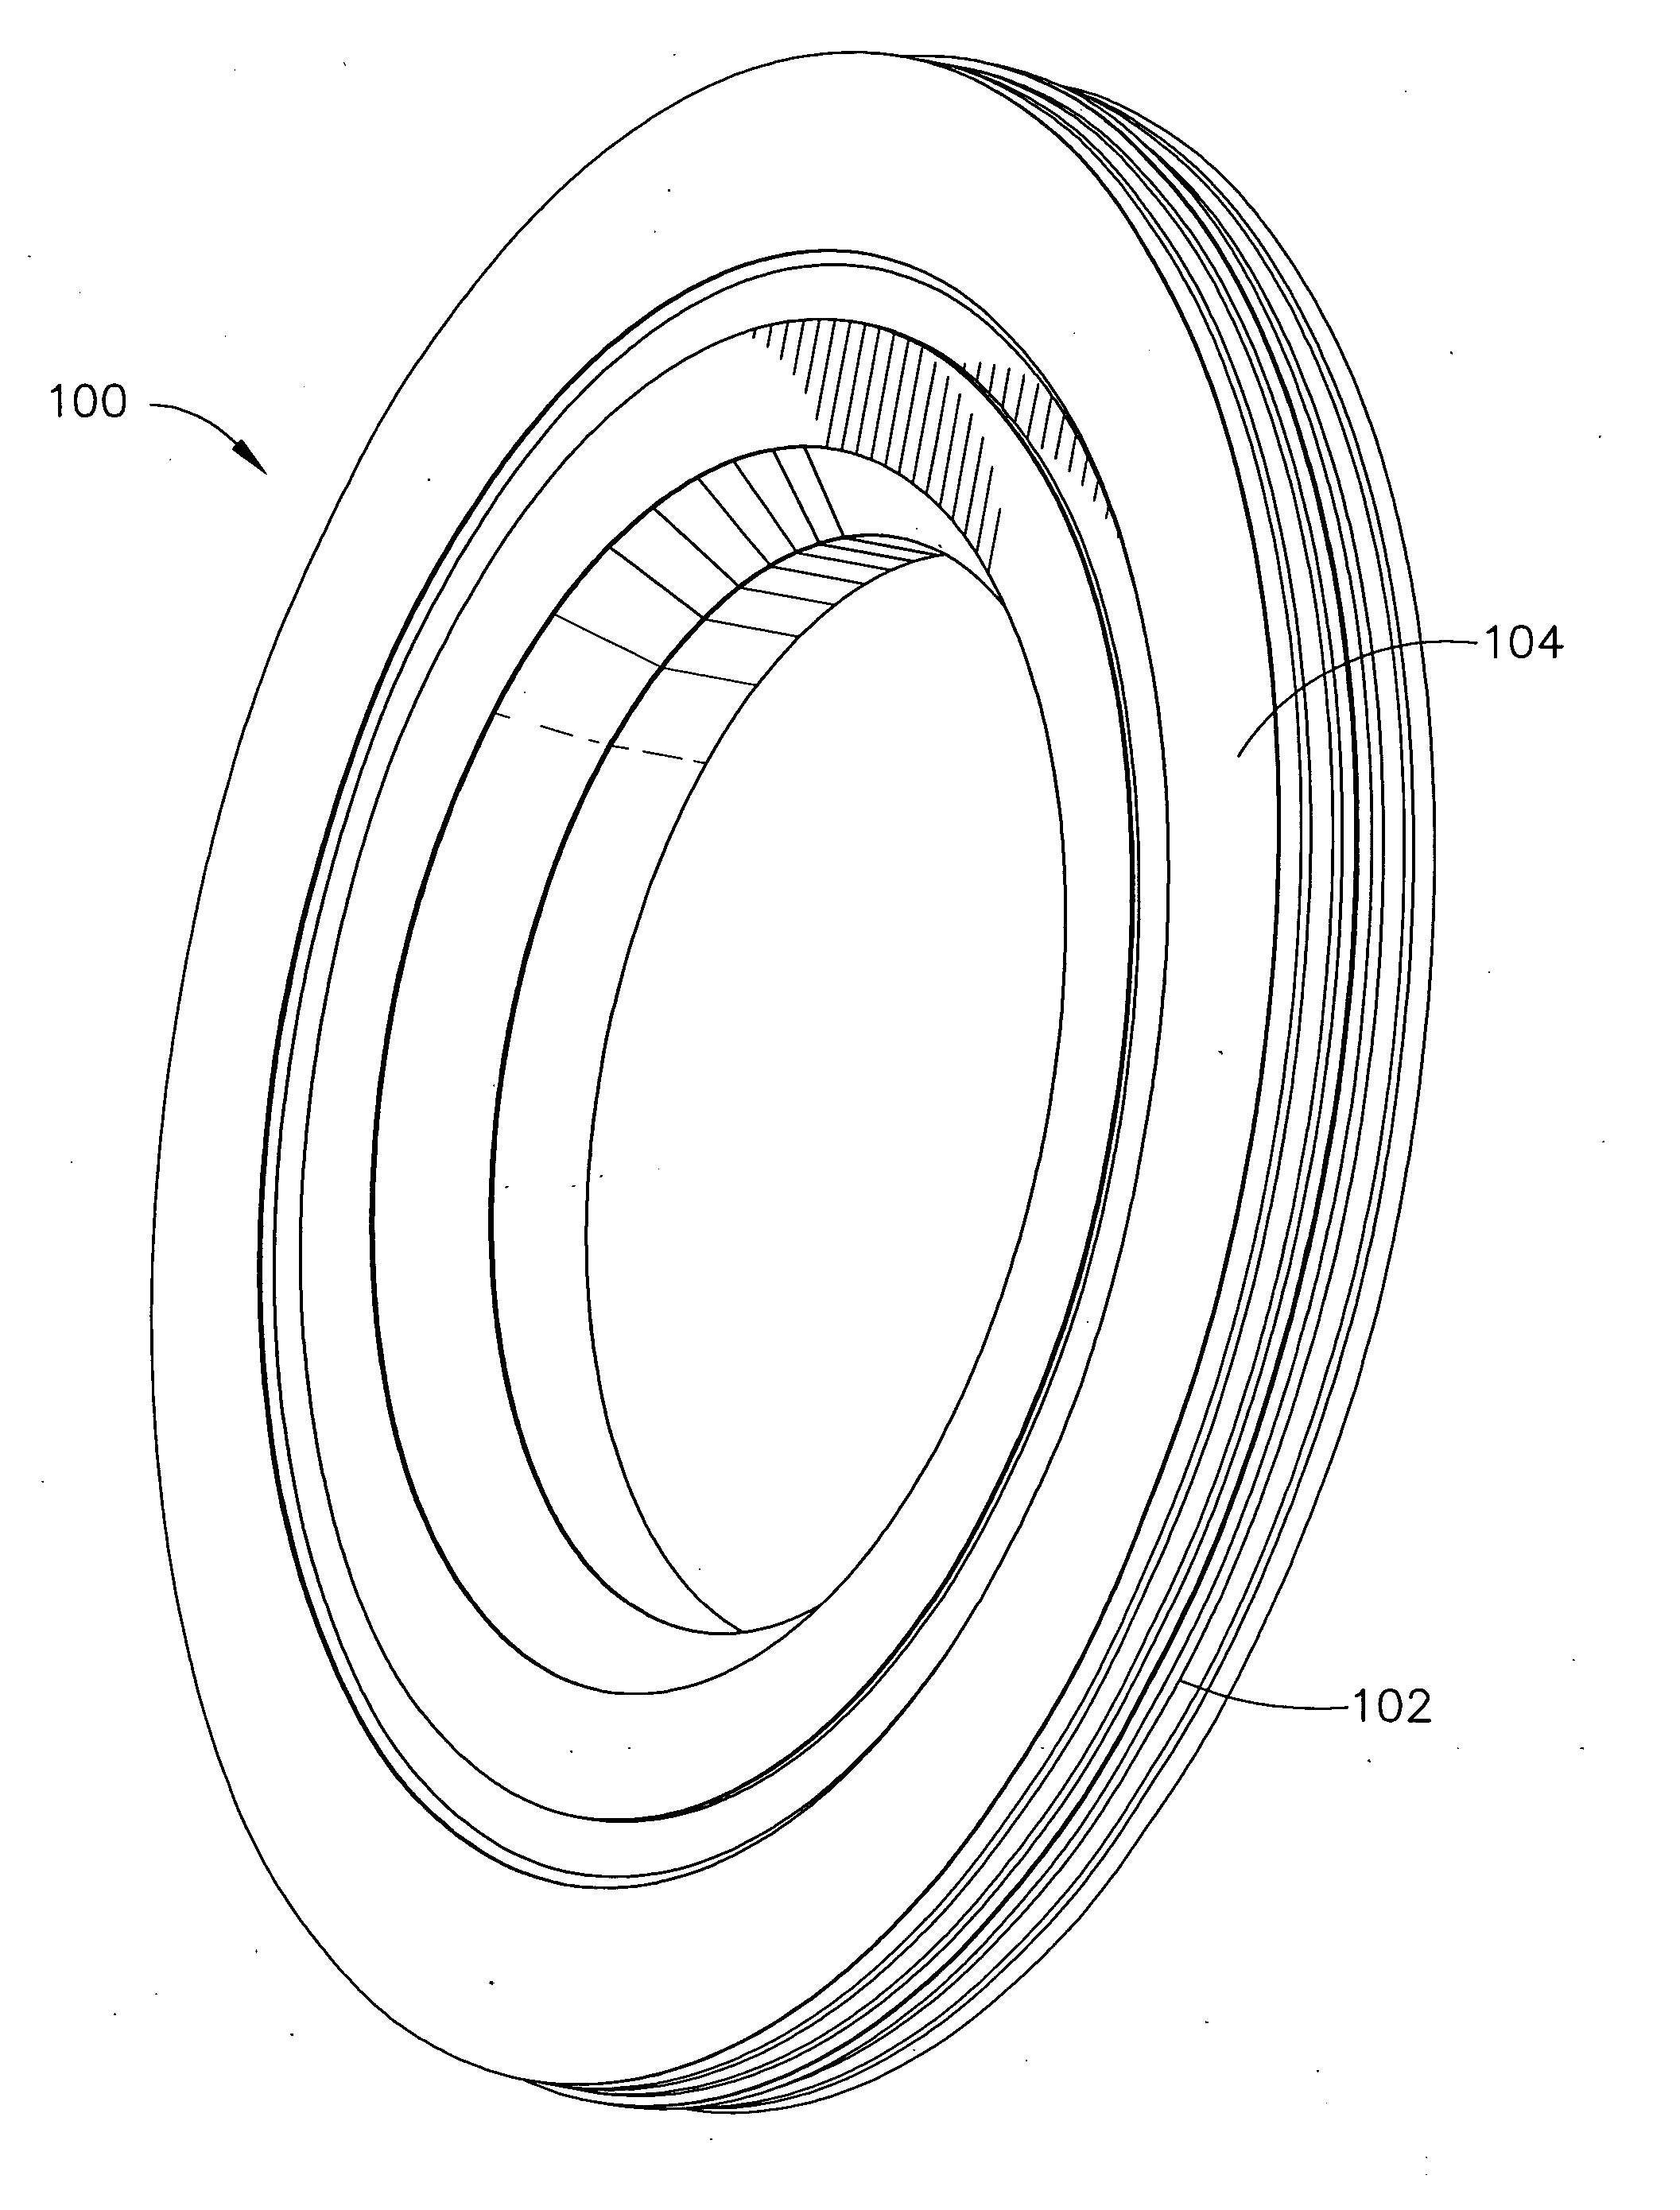 Use of powder metal sintering/diffusion bonding to enable applying silicon carbide or rhenium alloys to face seal rotors